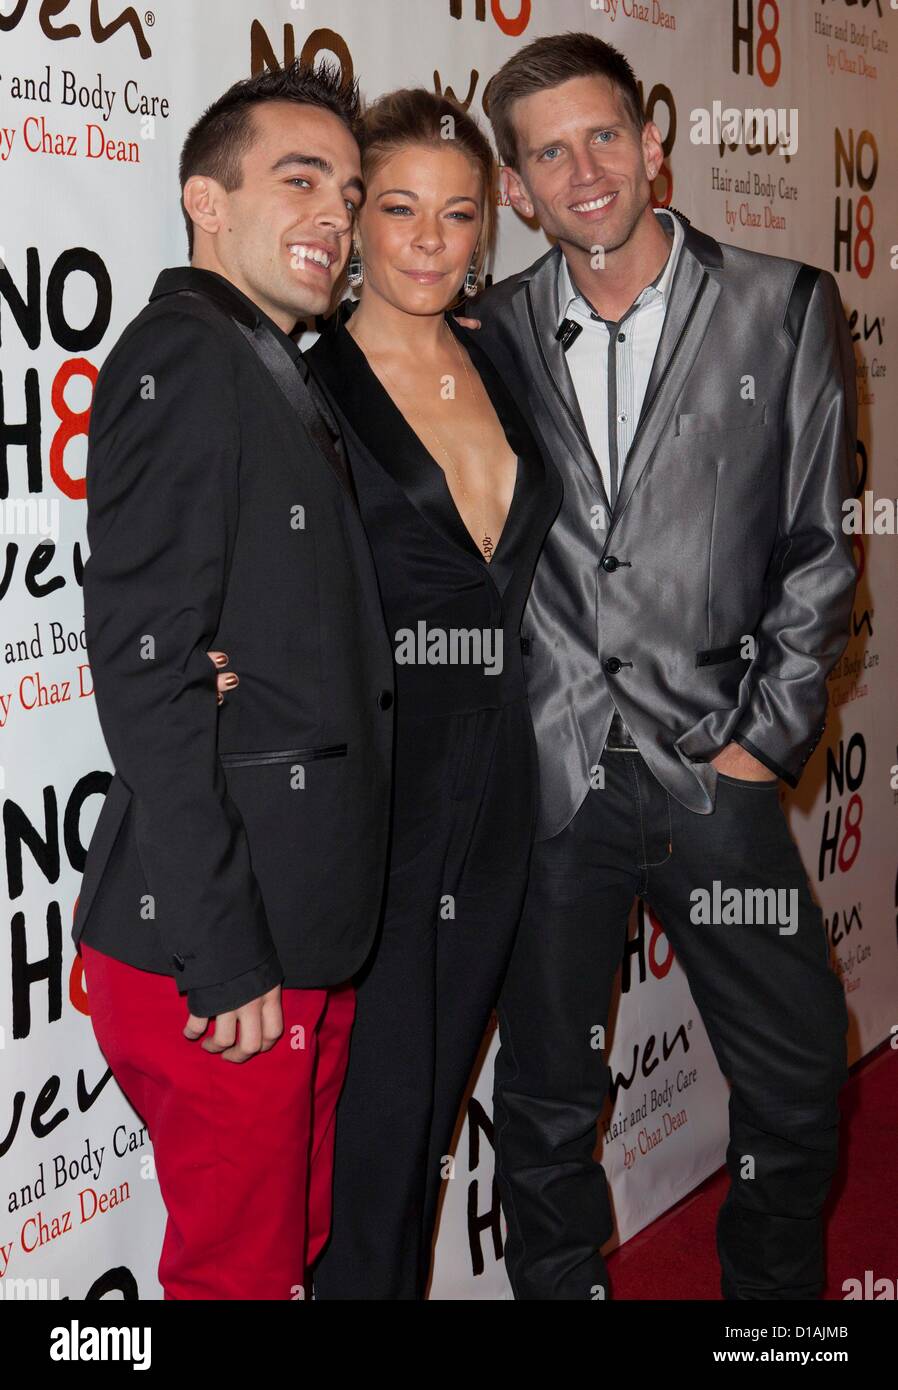 Adam Bouska, LeAnn Rimes, Jeff Parshley at arrivals for NOH8 Campaign 4th Anniversary Celebration, Avalon Hollywood, Los Angeles, CA December 12, 2012. Photo By: Emiley Schweich/Everett Collection/Alamy live news. USA.  Stock Photo